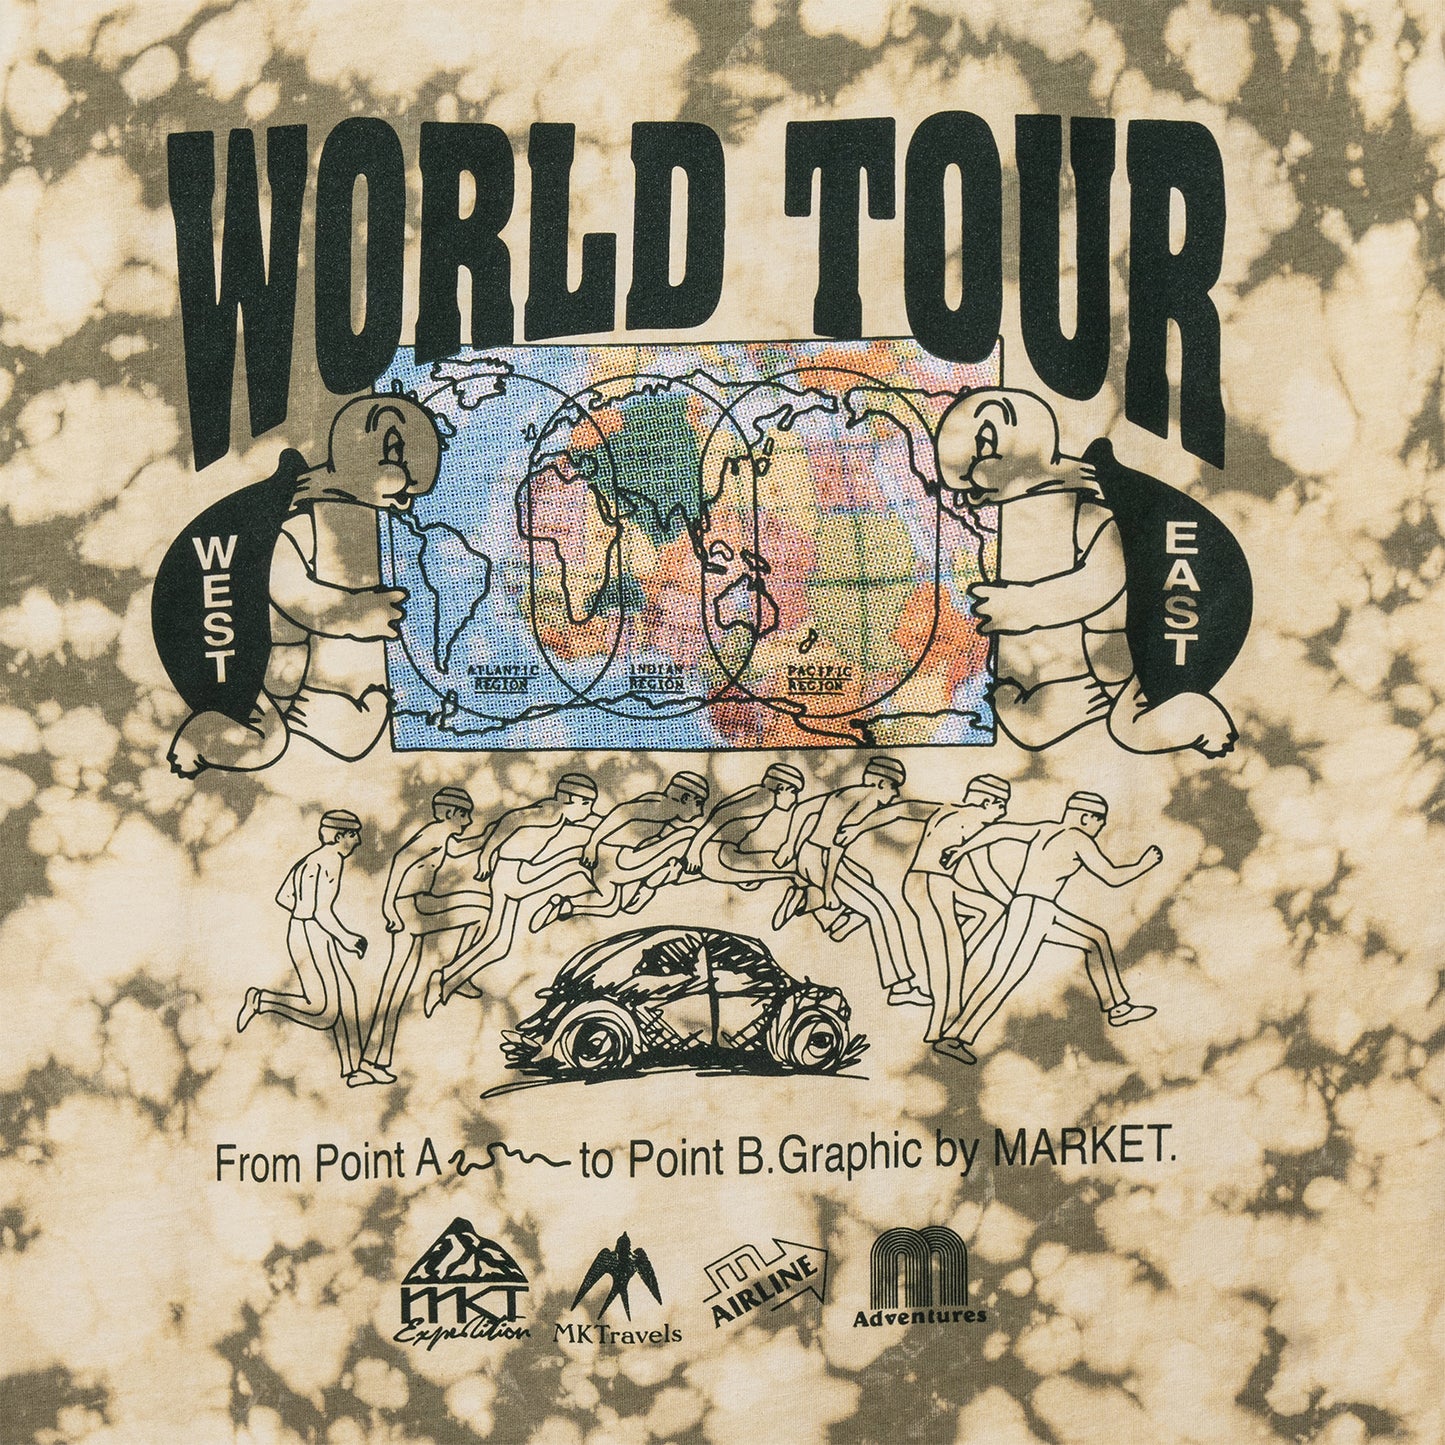 MARKET clothing brand WORLD TOUR T-SHIRT. Find more graphic tees, hats, hoodies and more at MarketStudios.com. Formally Chinatown Market.